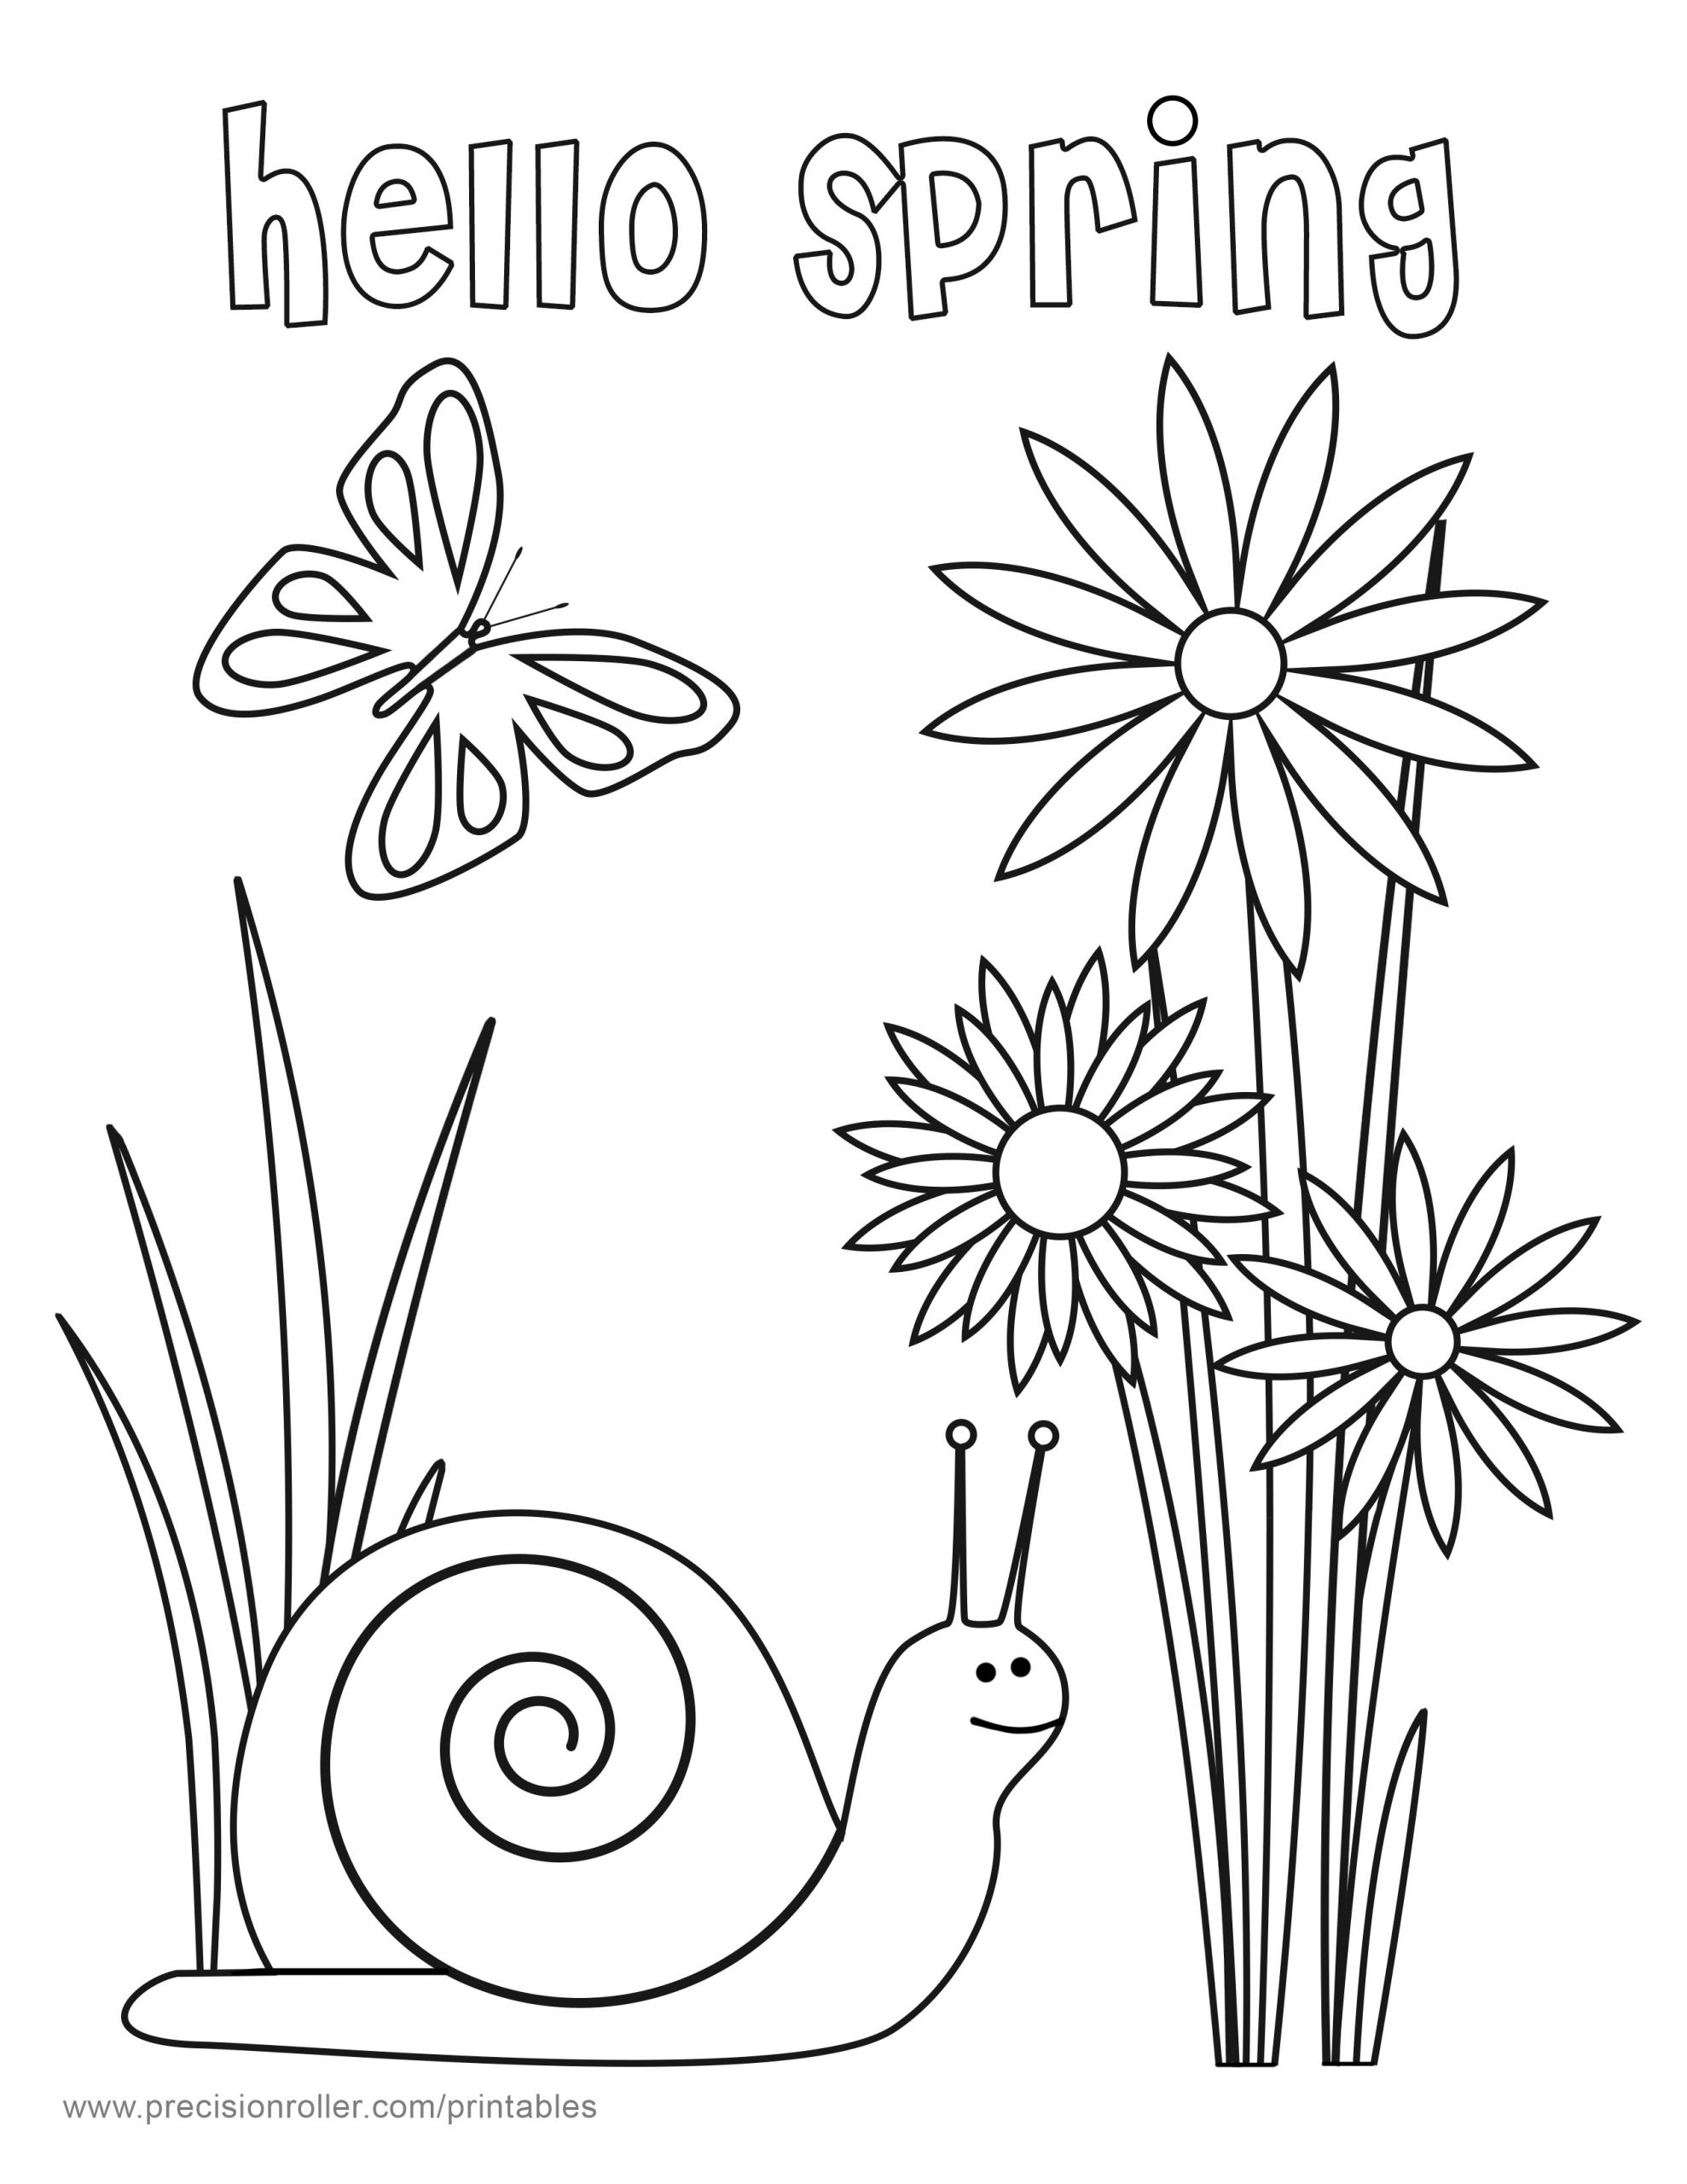 Free Printable Spring Coloring Pages
 Hello Spring Coloring Page Precision Printables